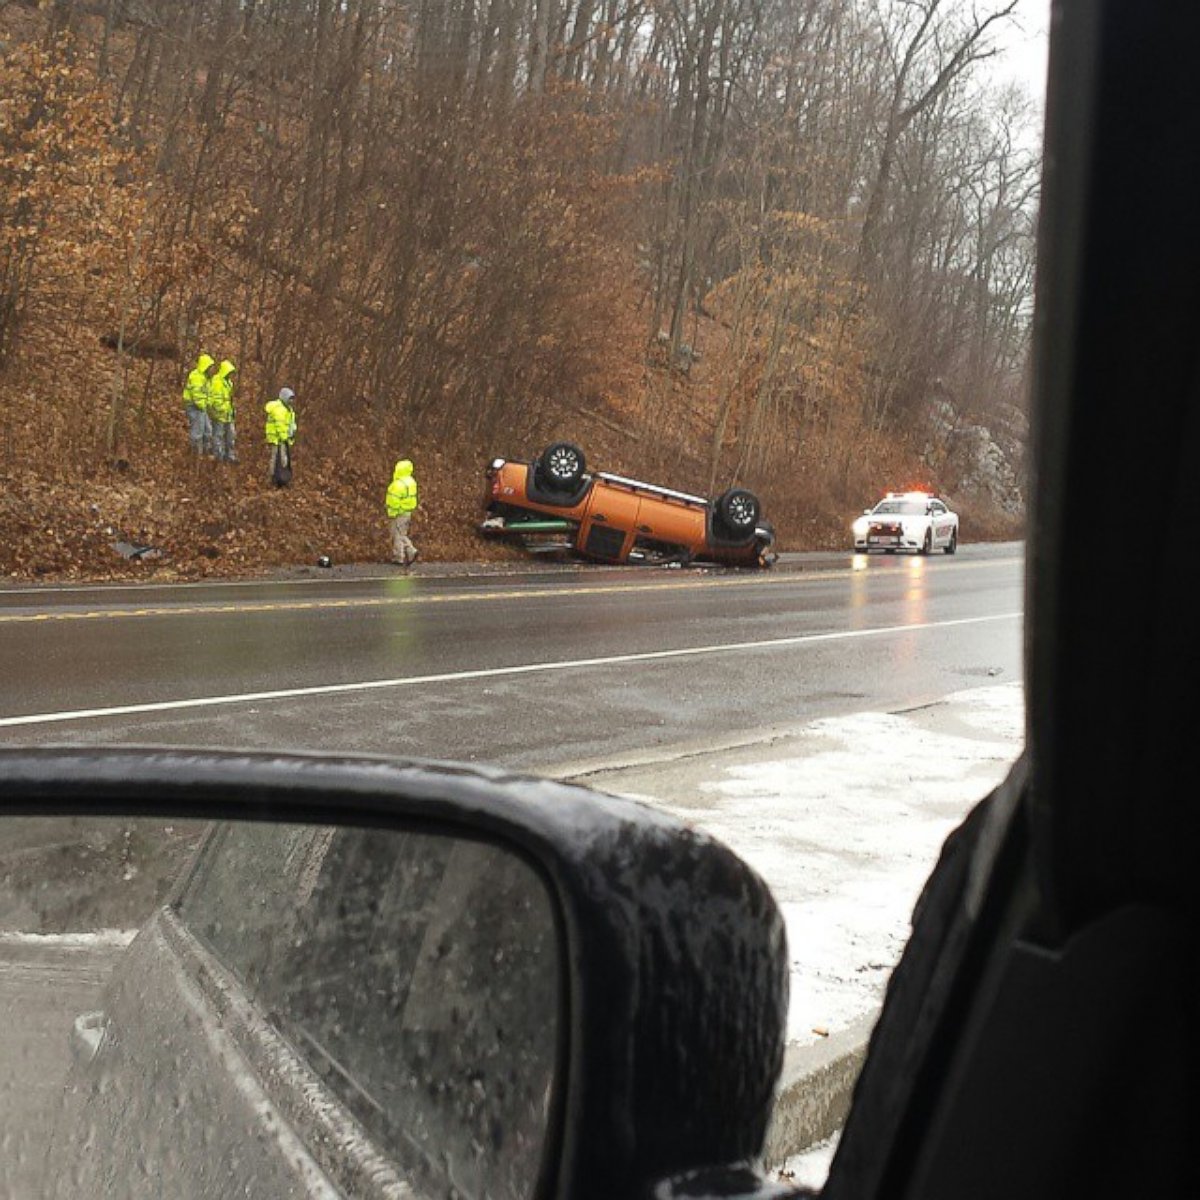 PHOTO: An overturned car on Rt 9 between Peekskill and Cold Spring, NY, Jan. 18, 2015.